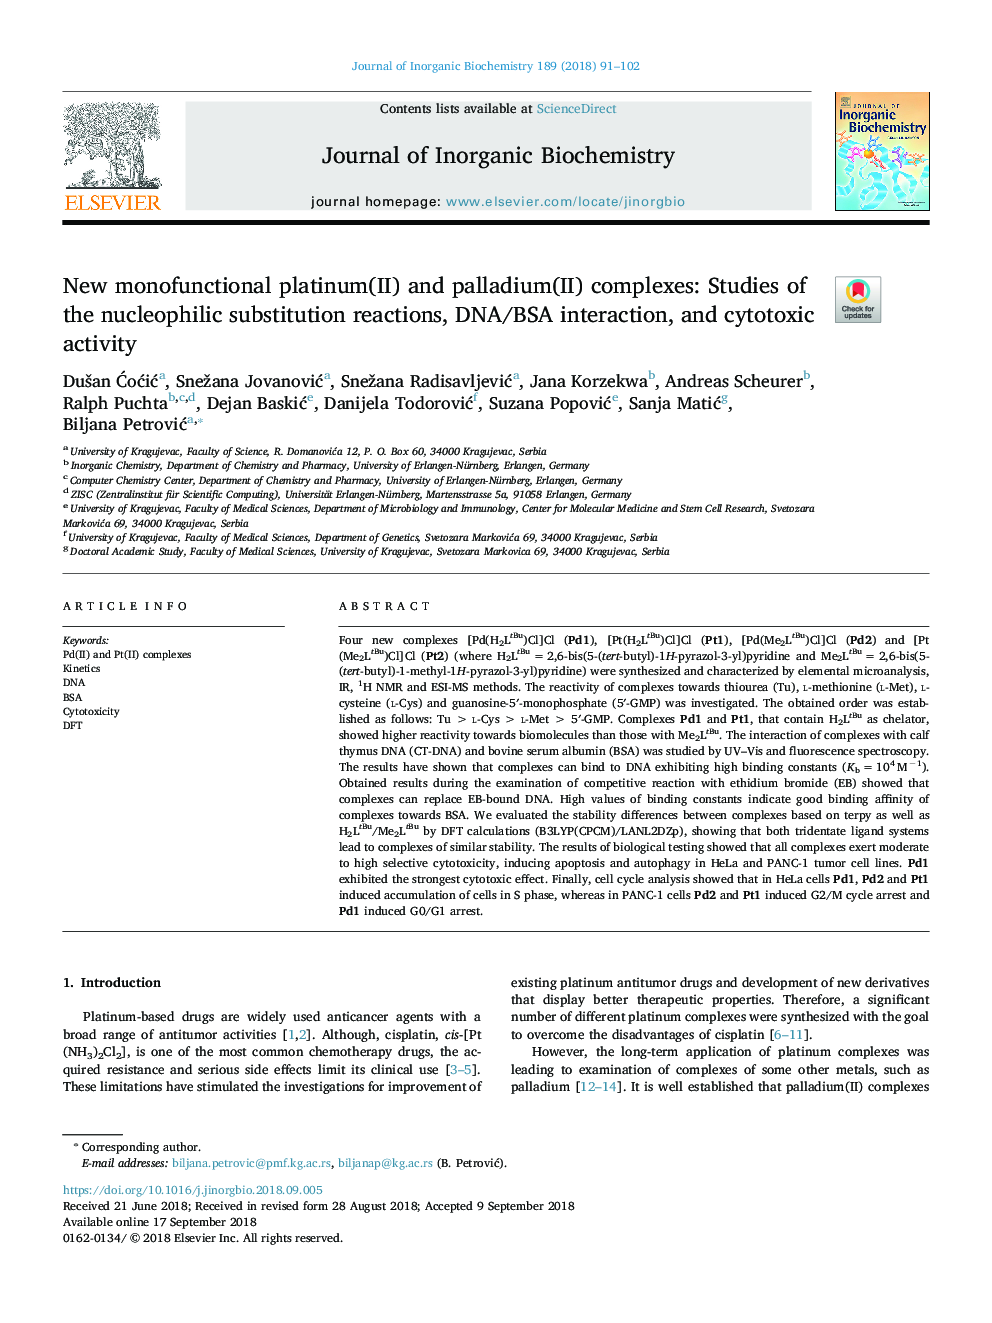 New monofunctional platinum(II) and palladium(II) complexes: Studies of the nucleophilic substitution reactions, DNA/BSA interaction, and cytotoxic activity